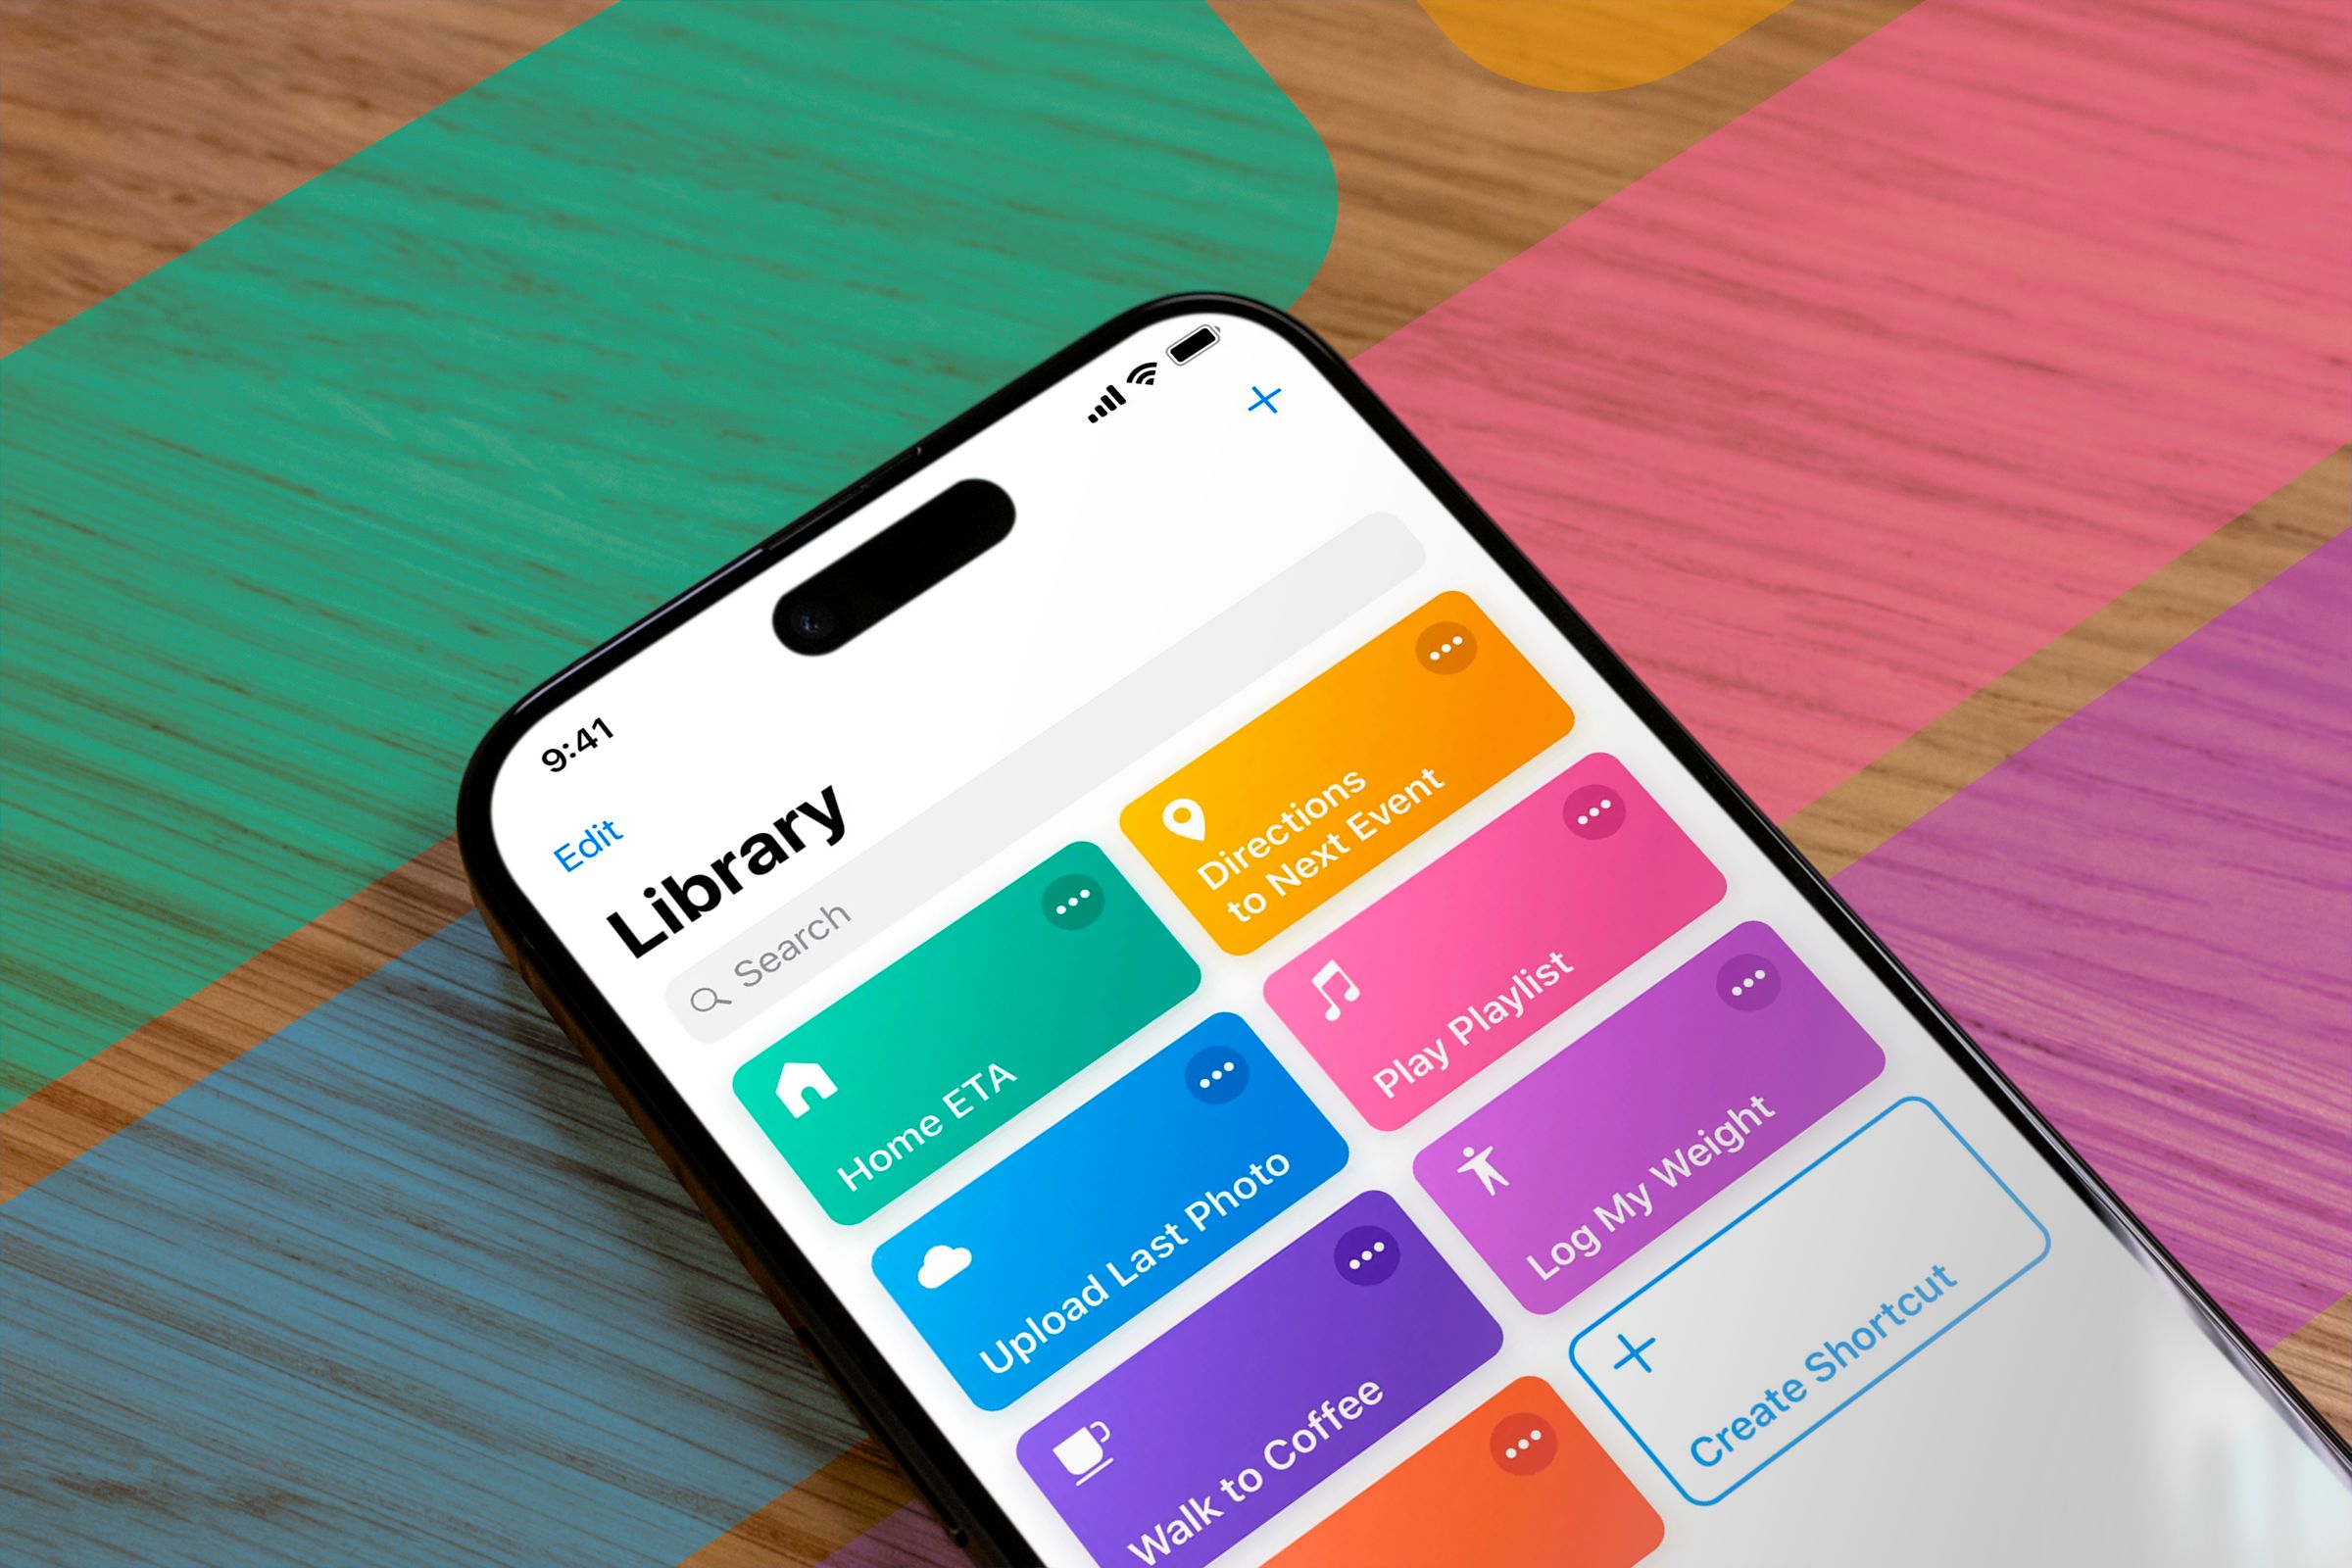 If You’ve Never Used the iPhone Shortcuts App, Here’s the Best Way to Get Started